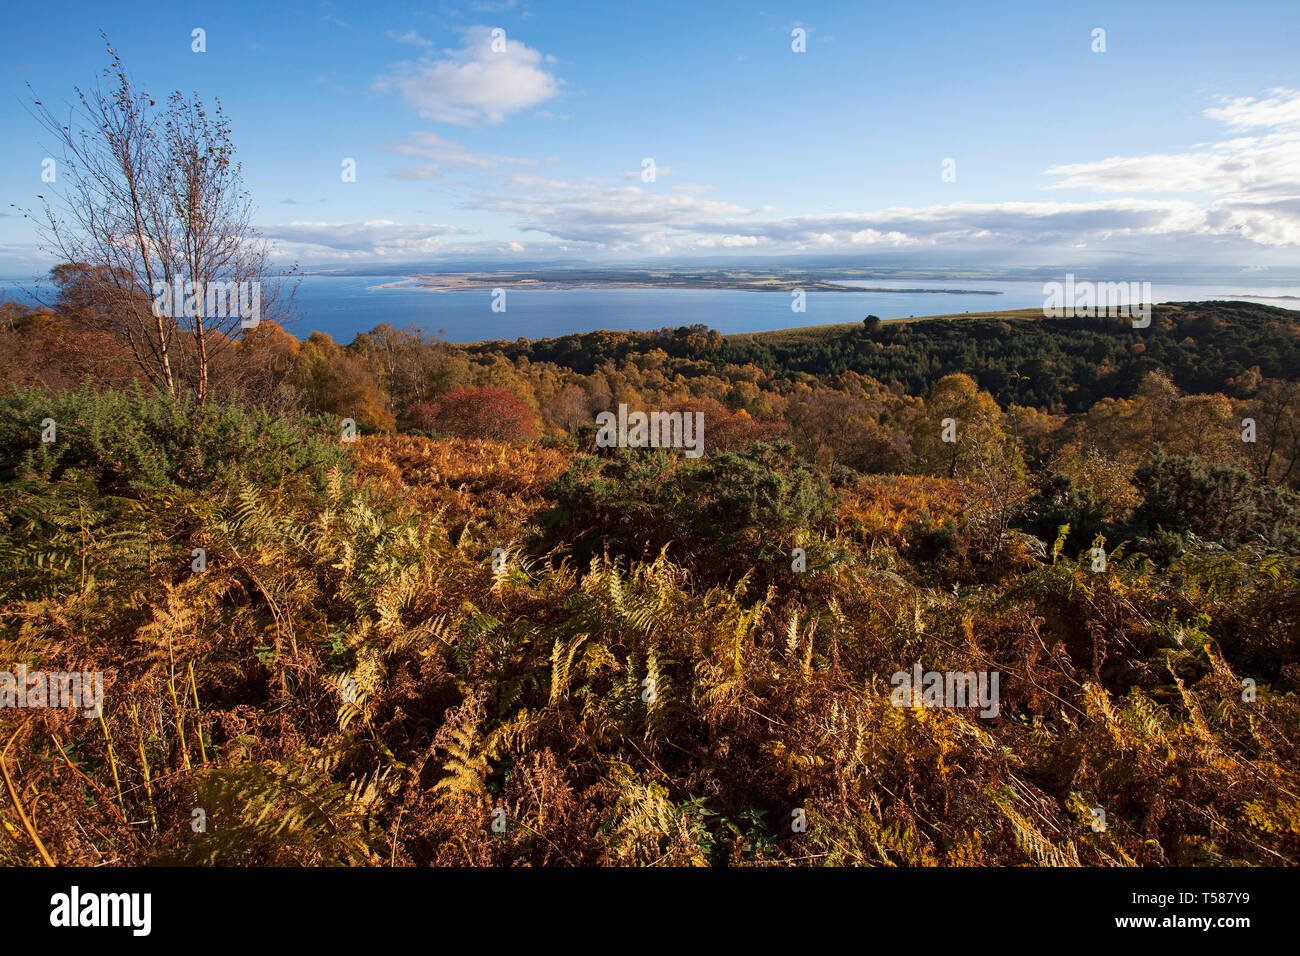 View over Moray Firth from the road to Killen Black Isle Ross and Cromarty Scotland UK October 2016 Stock Photo